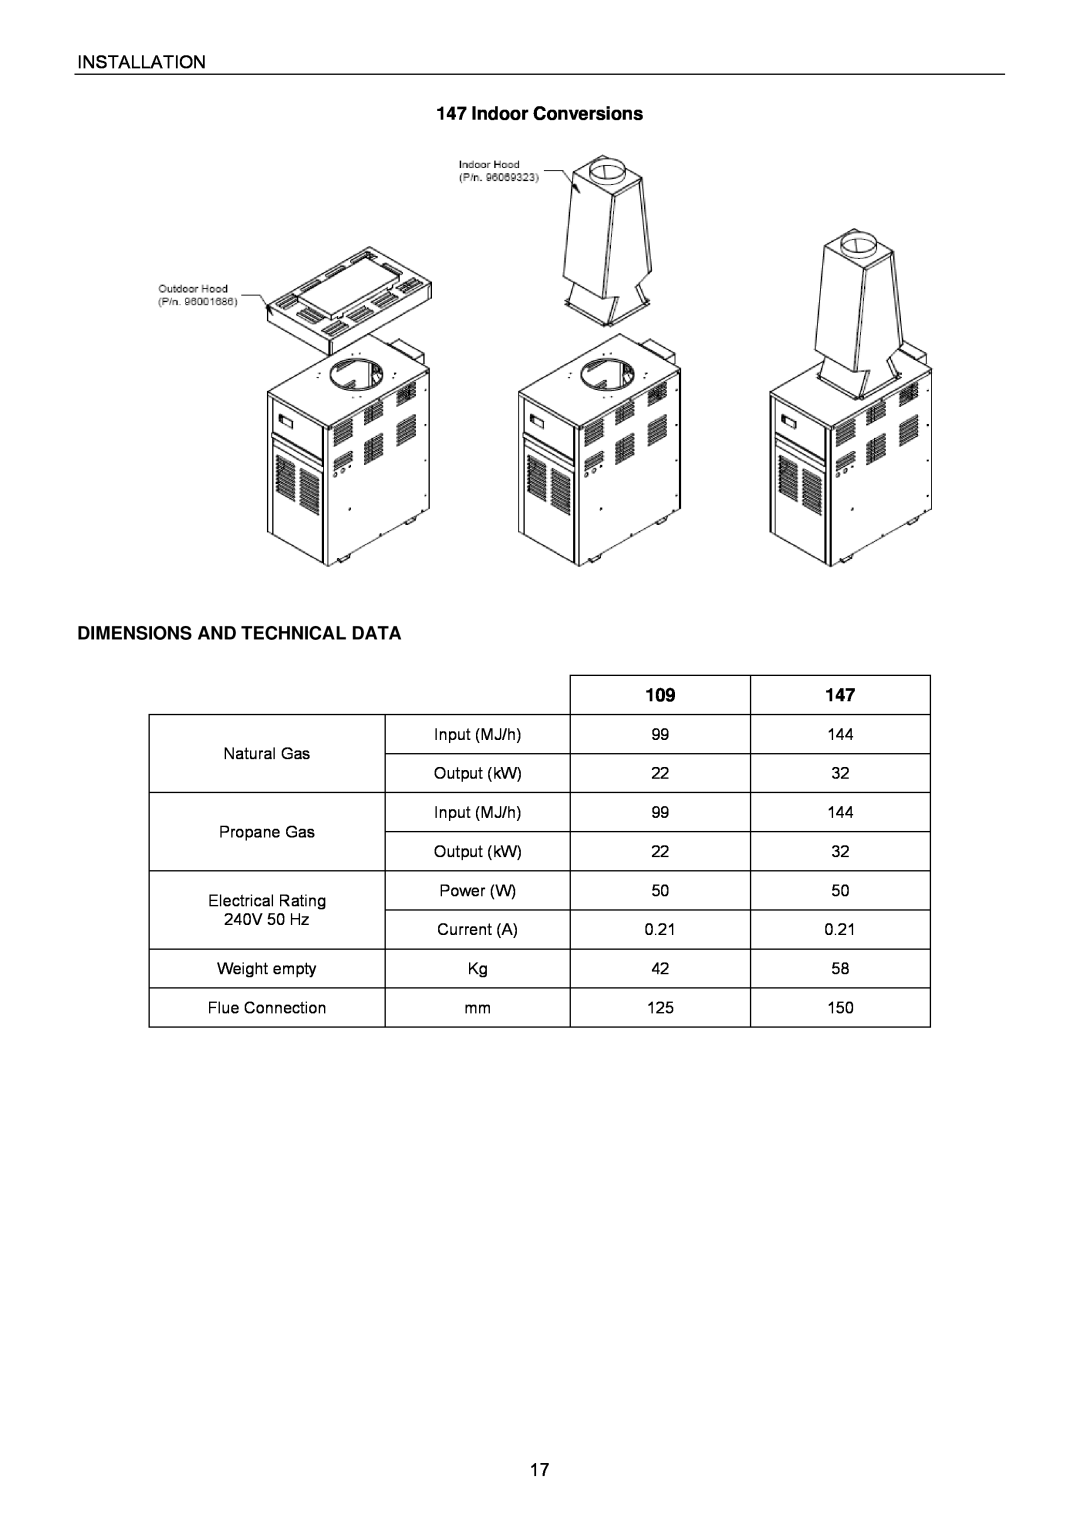 Raypak B0109, B0147 installation instructions Indoor Conversions, Dimensions And Technical Data, Installation 